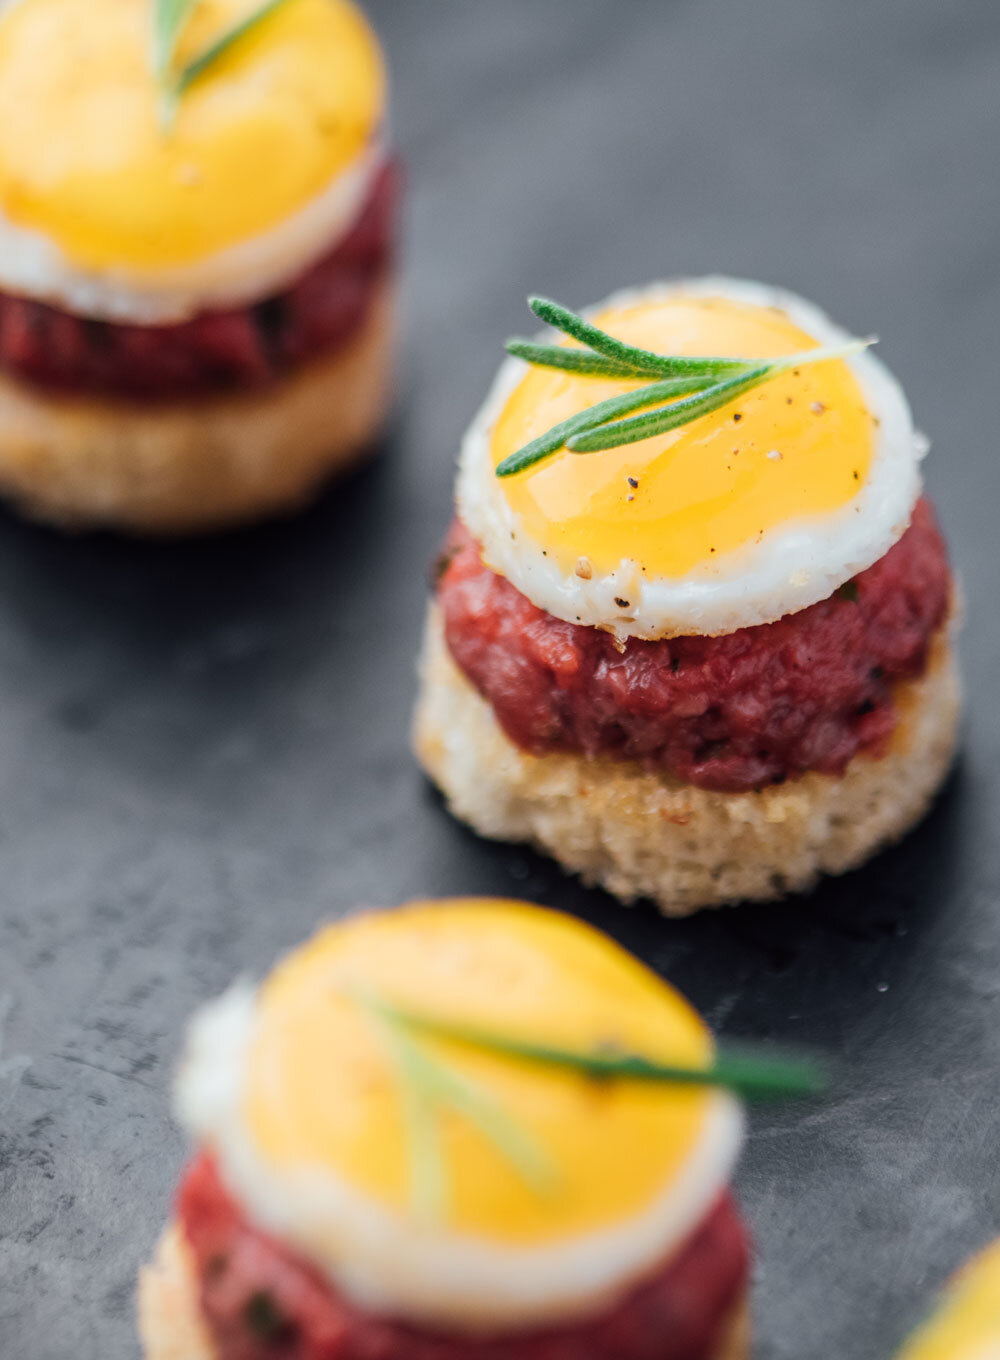 Luxurious round toast bases with Wagyu tartar, quail egg, and rosemary, a premium passed appetizer by Joel Catering, New Orleans' top caterer.